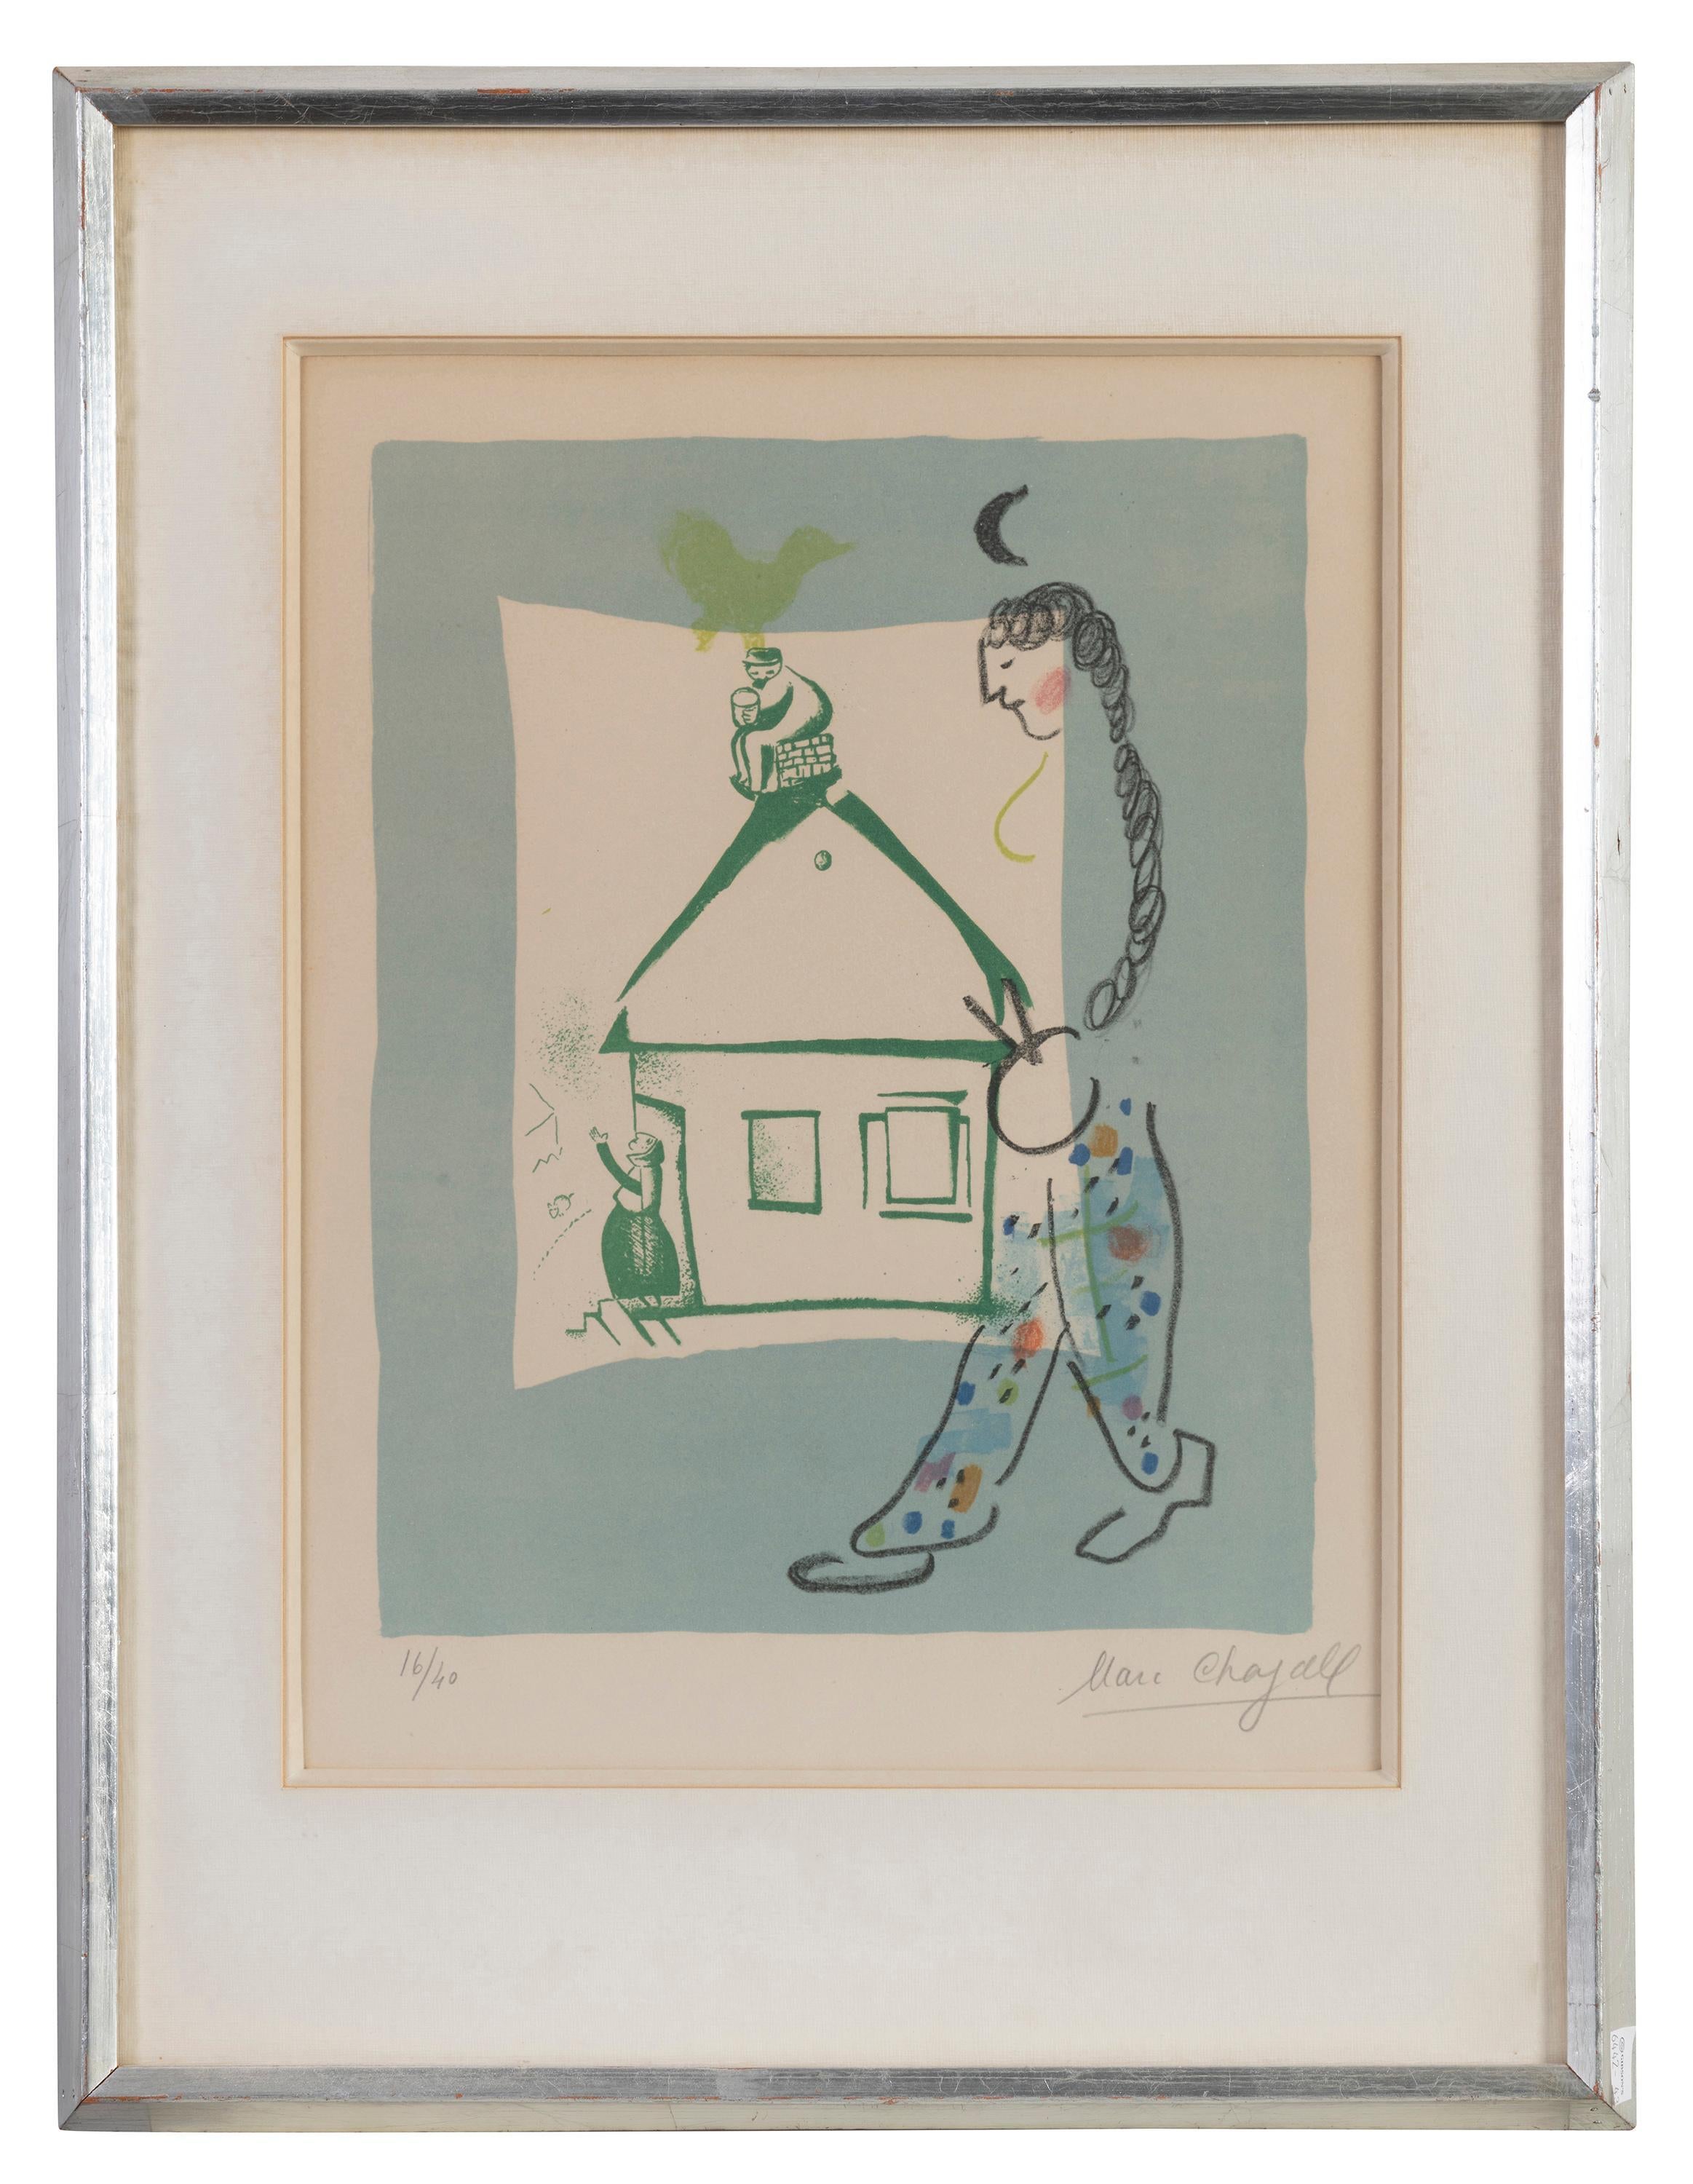 Marc Chagall 
The House in My Village, 1960
Lithograph
Hand signed lower righter
Edition 16/40 lower left
Frame size 56 x 42.5 x 3 cm
Image size 32 × 25.5 cm
Frame included

Reference Mourlot  283

Some stains on the mat